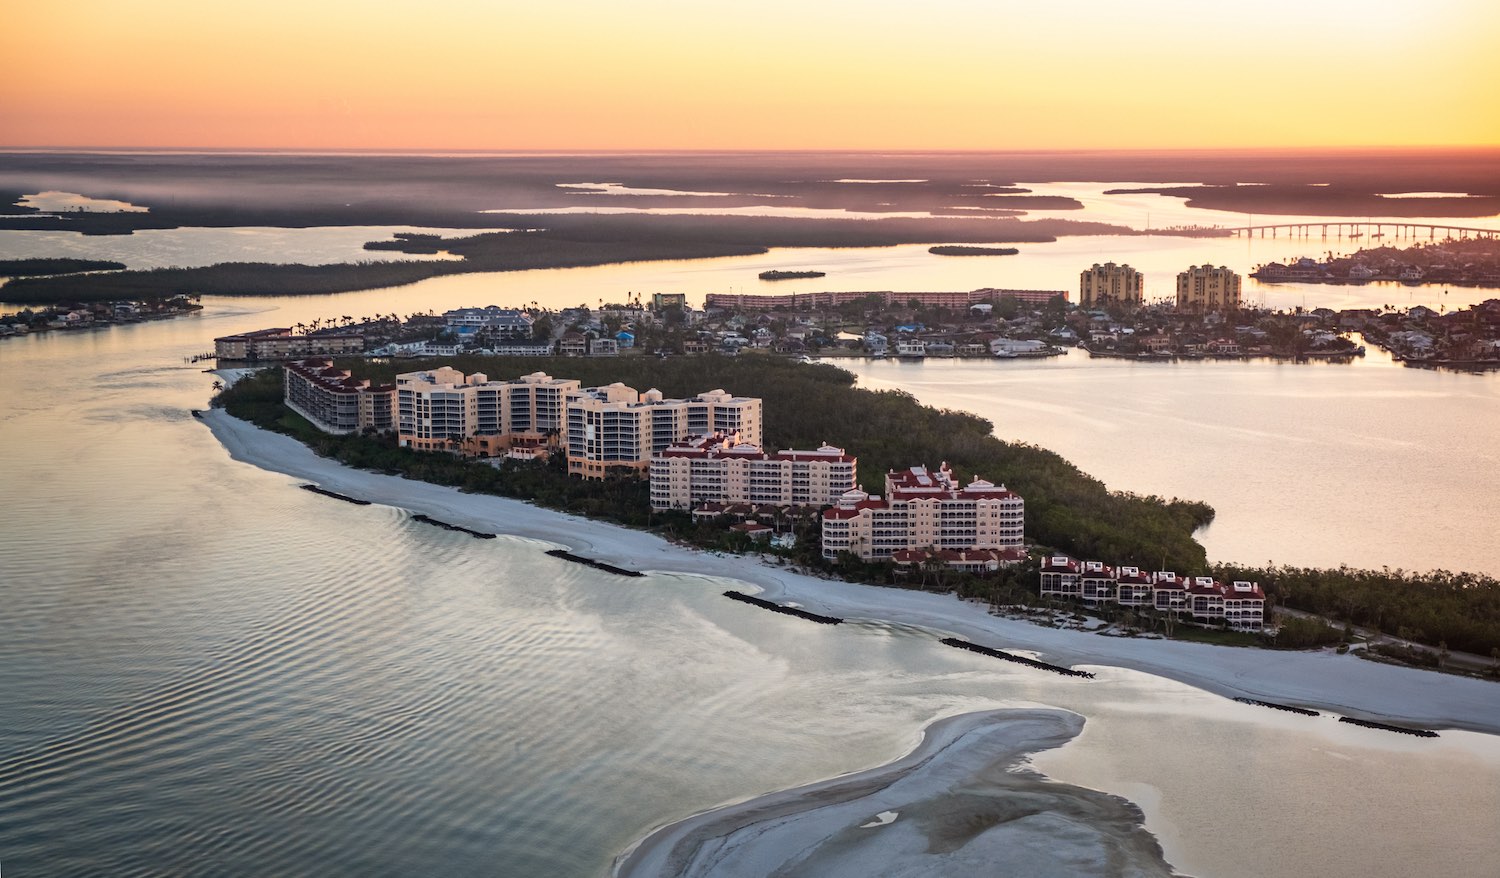 Aerial View Of Marco Island Resorts At Sunset